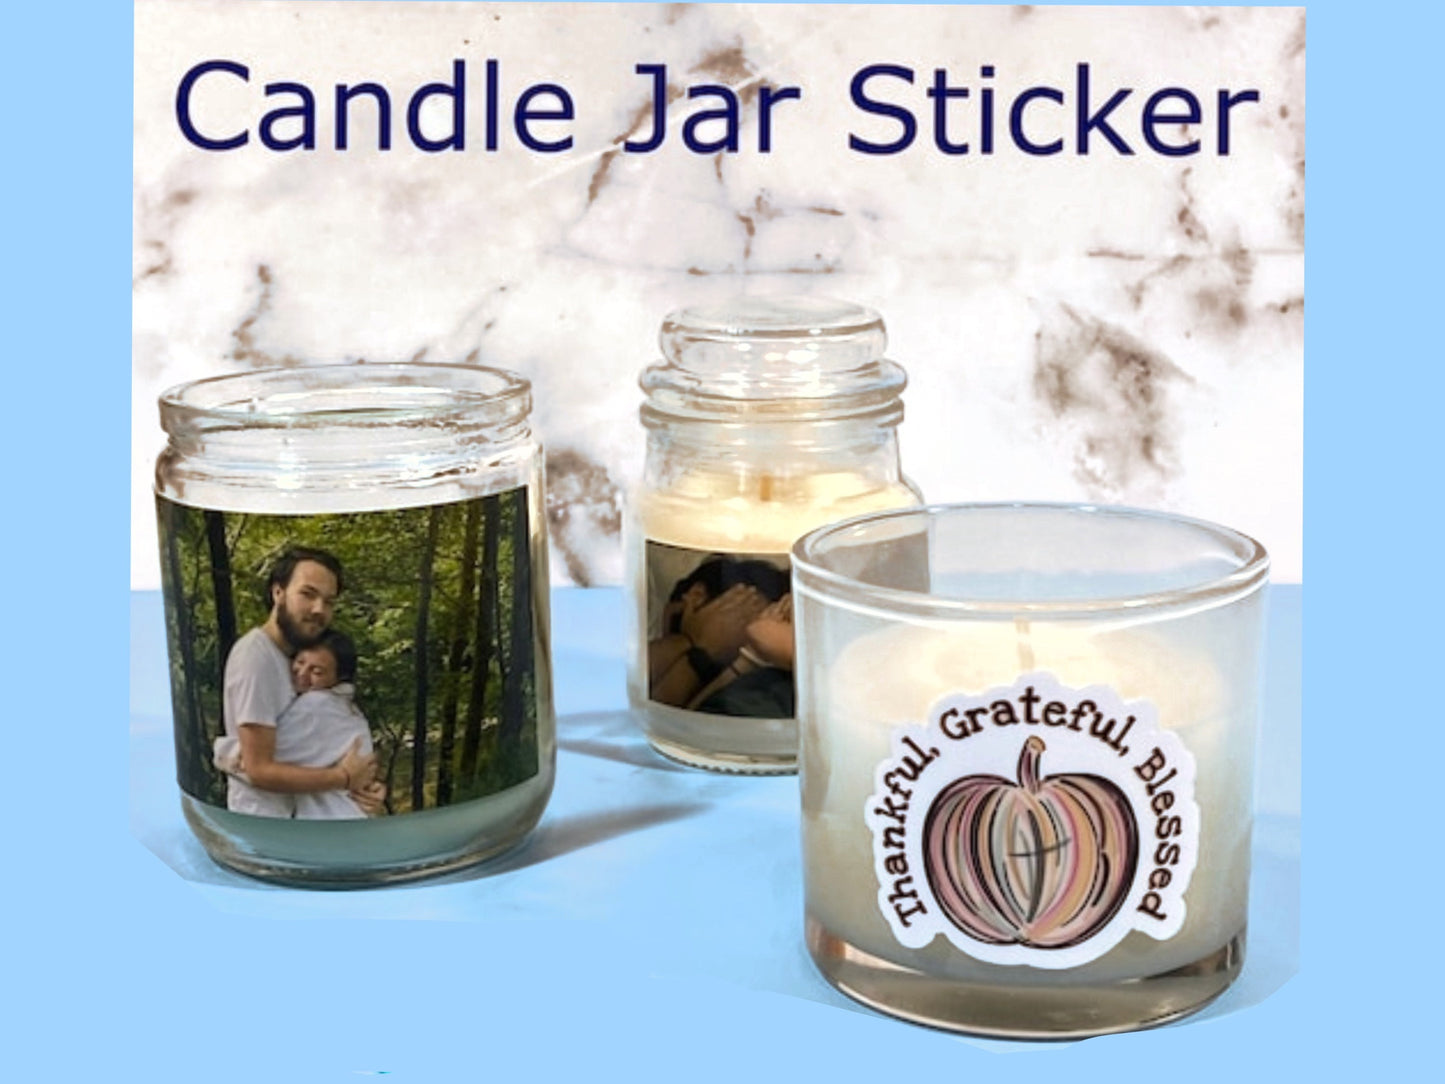 CANDLE JAR photo Sticker Waterproof, Laminated, choice of size - Great gift!